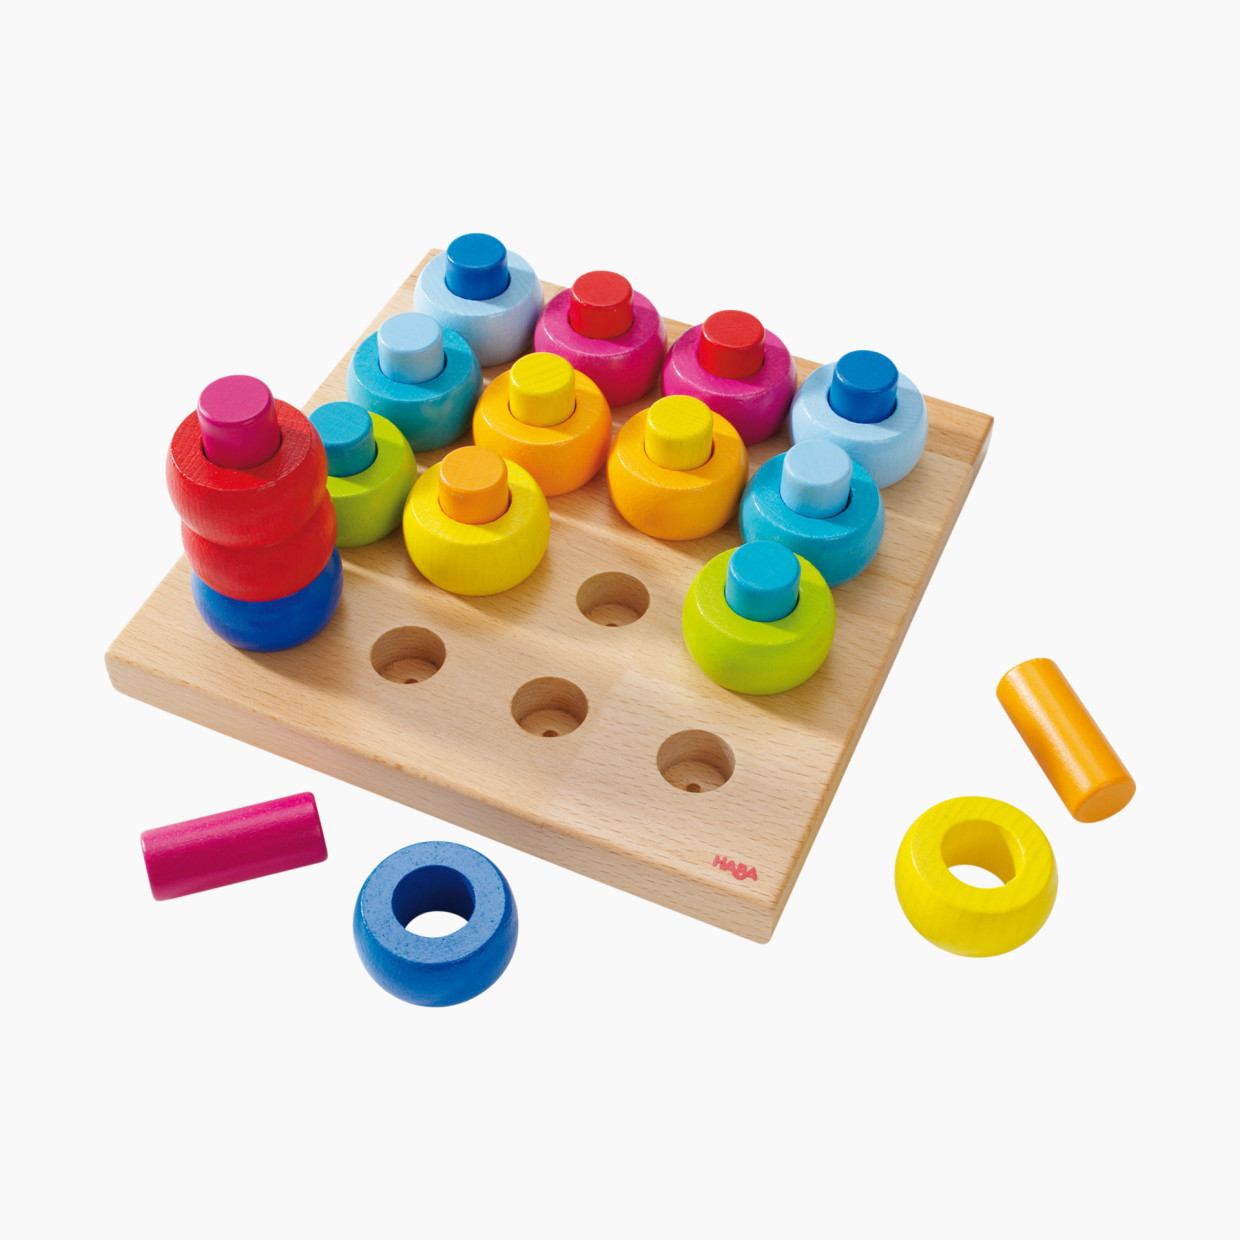 HABA Rainbow Whirls Pegging Game Wooden Toy Set.